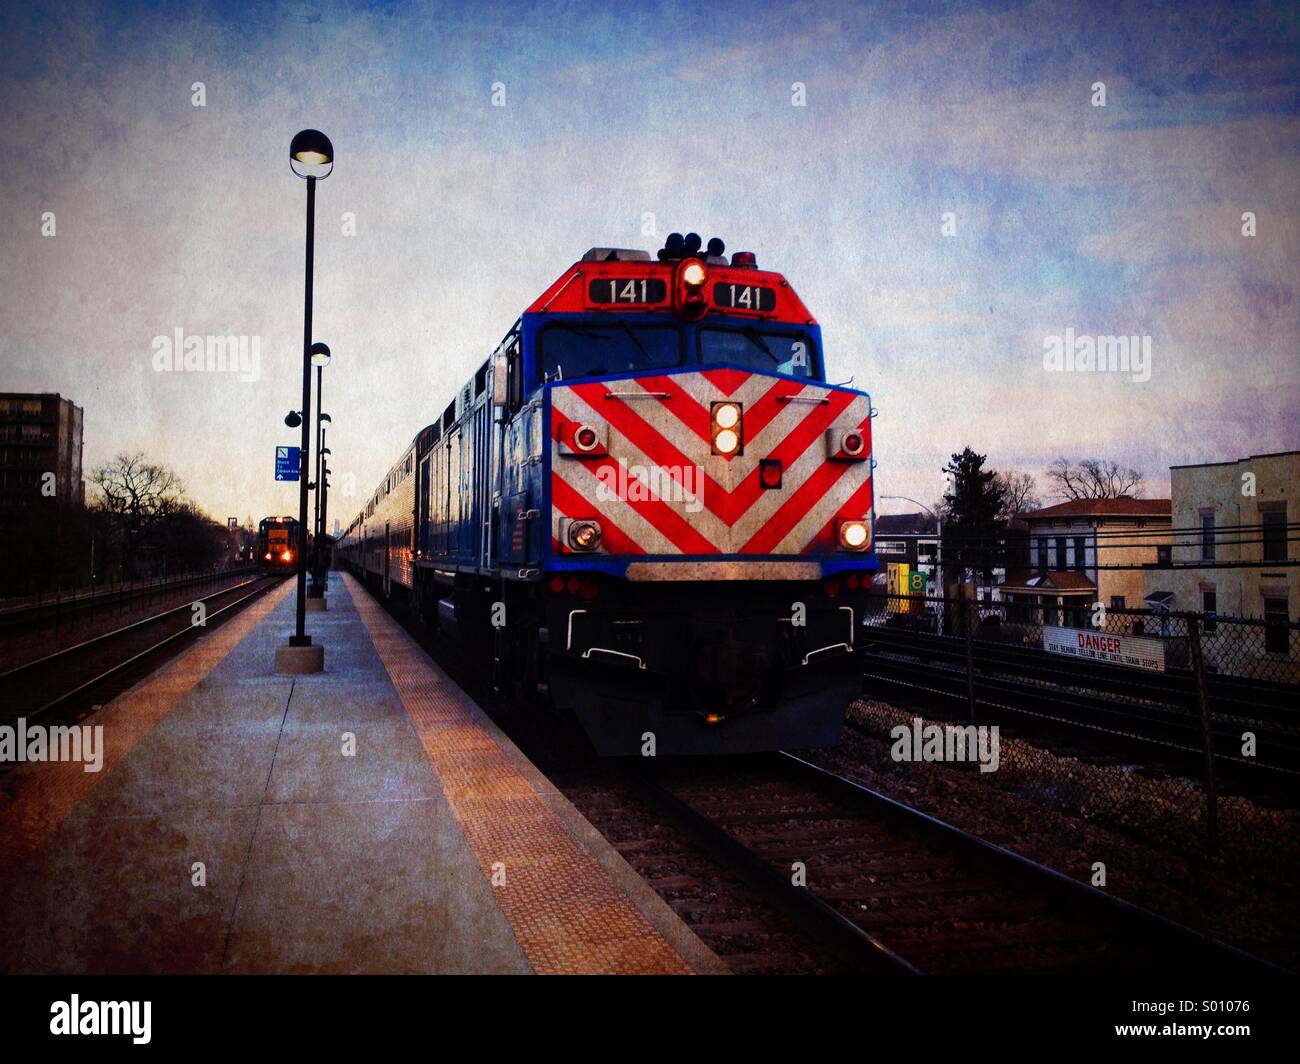 Metra commuter train pulling into Oak Park, Illinois station during evening rush hour. Stock Photo